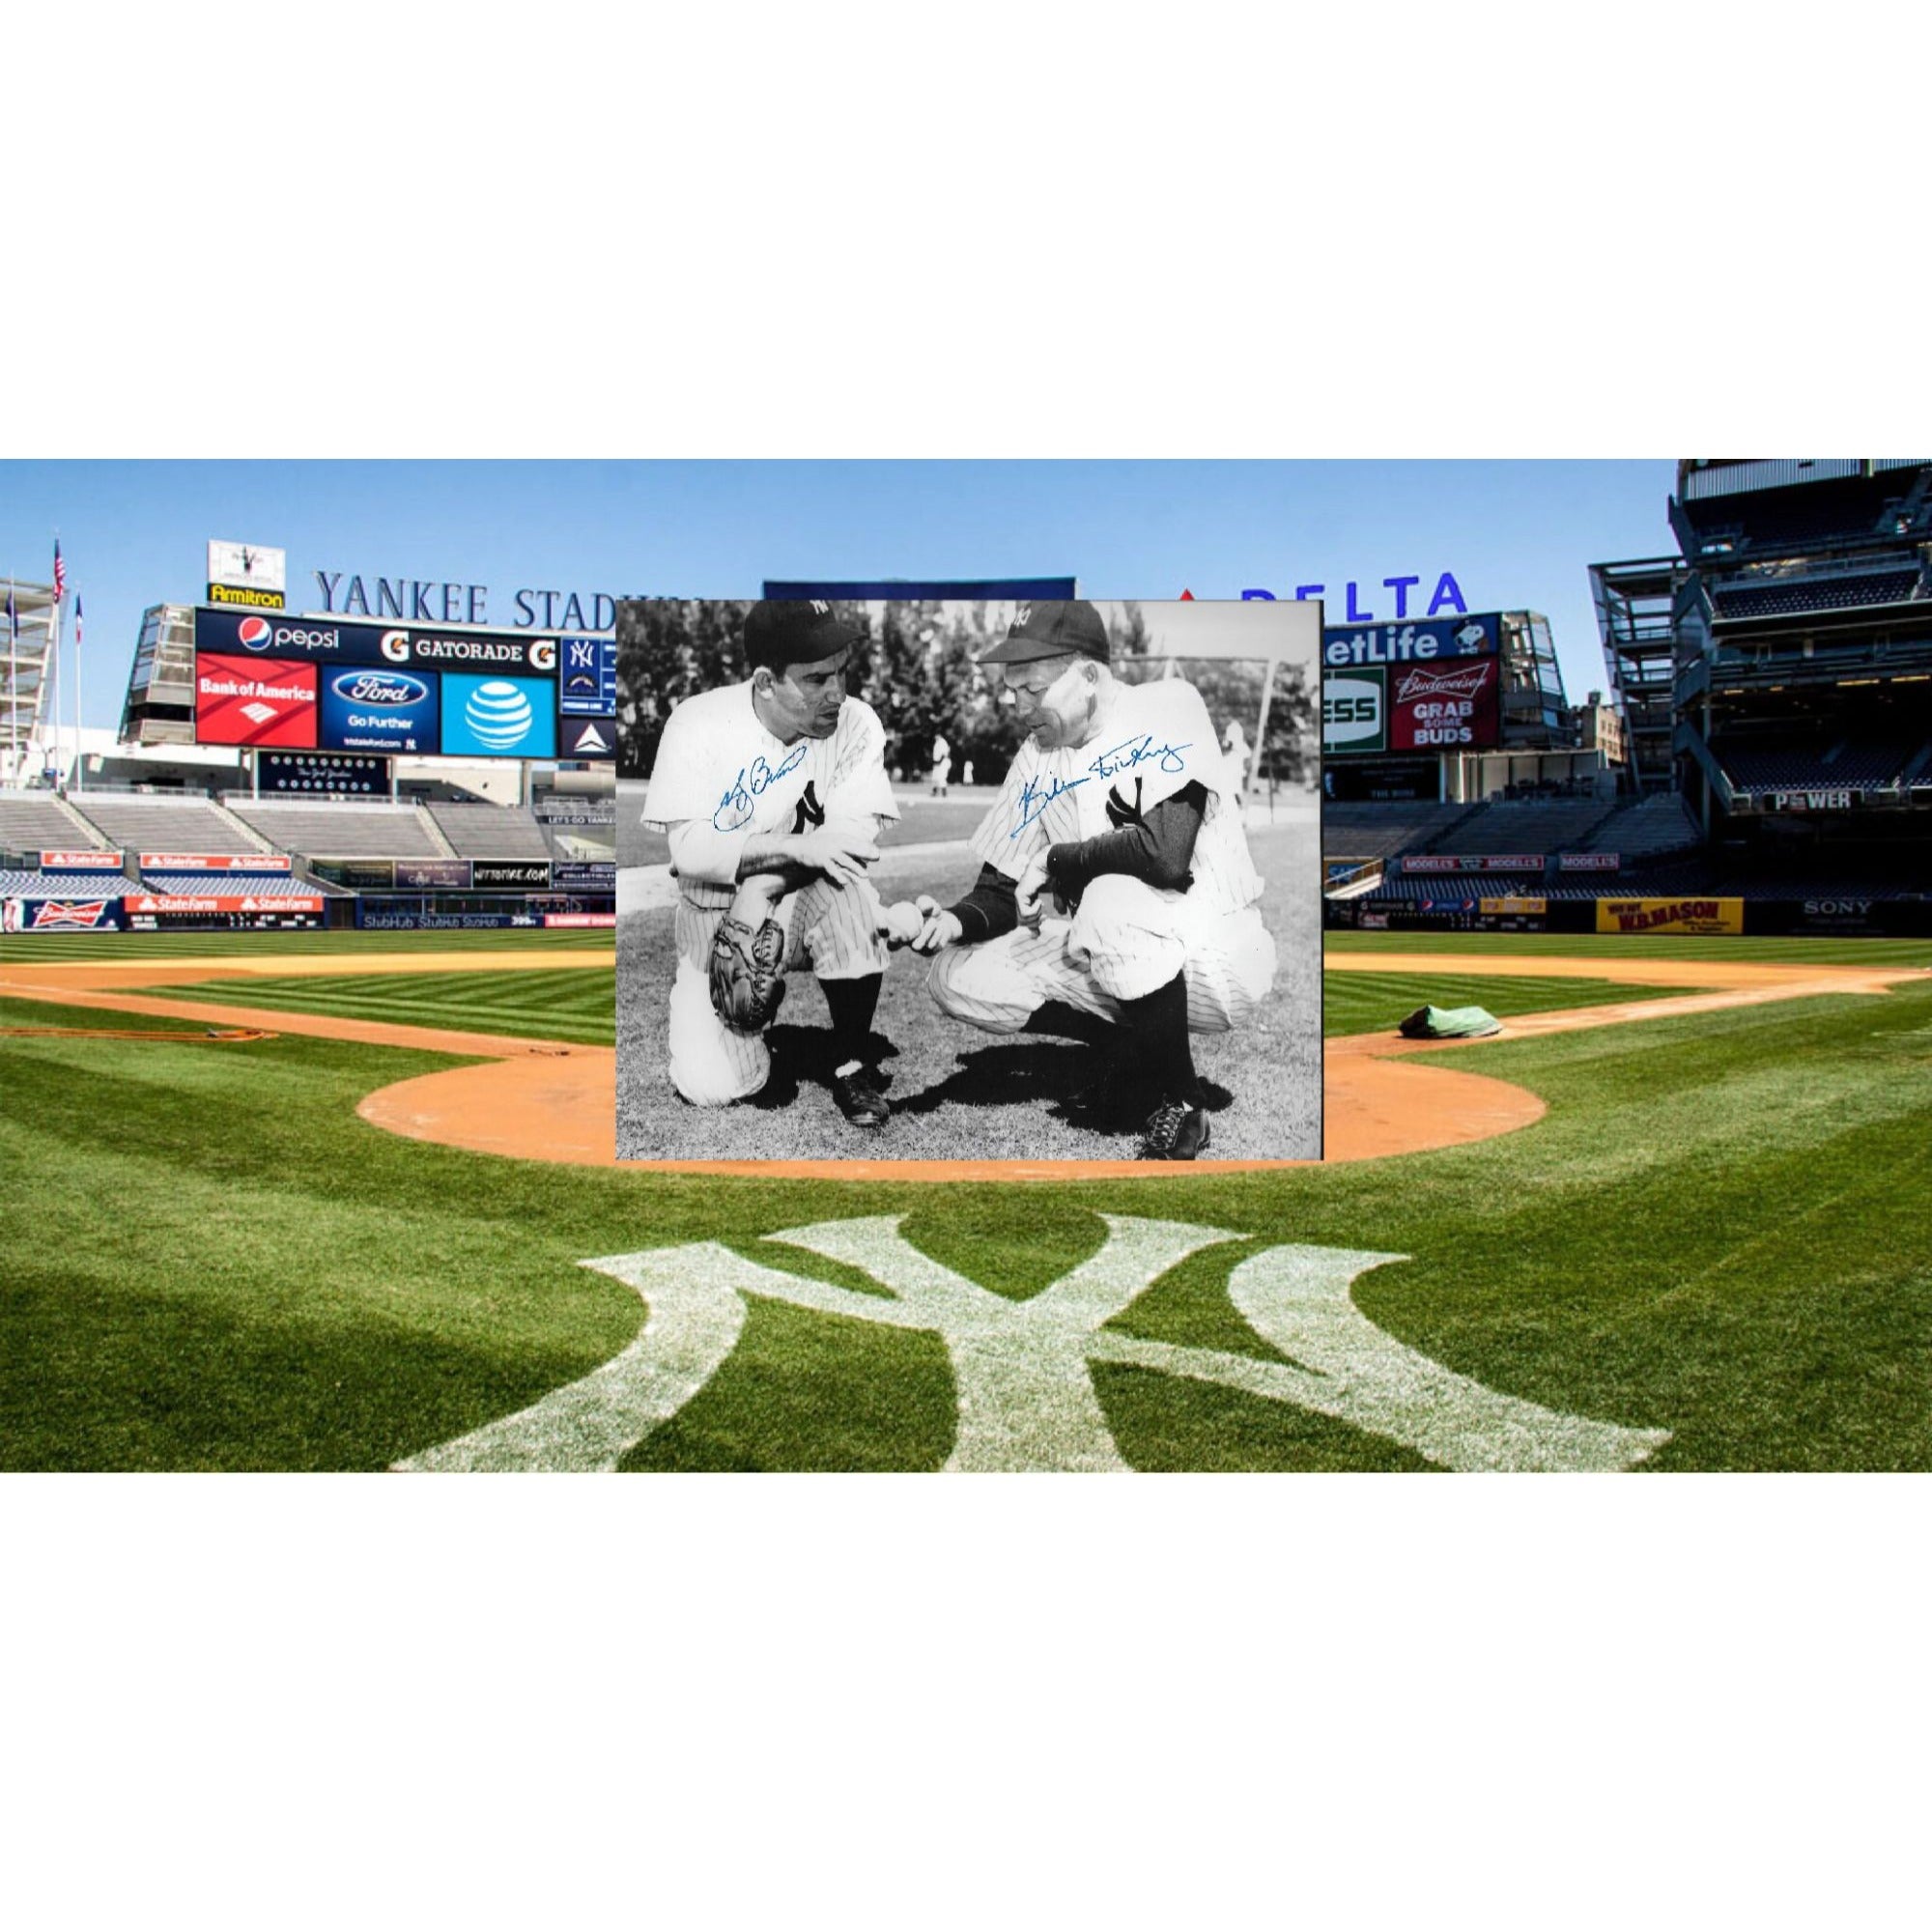 Bill Dickey and Yogi Berra 8 by 10 sign photo – Awesome Artifacts